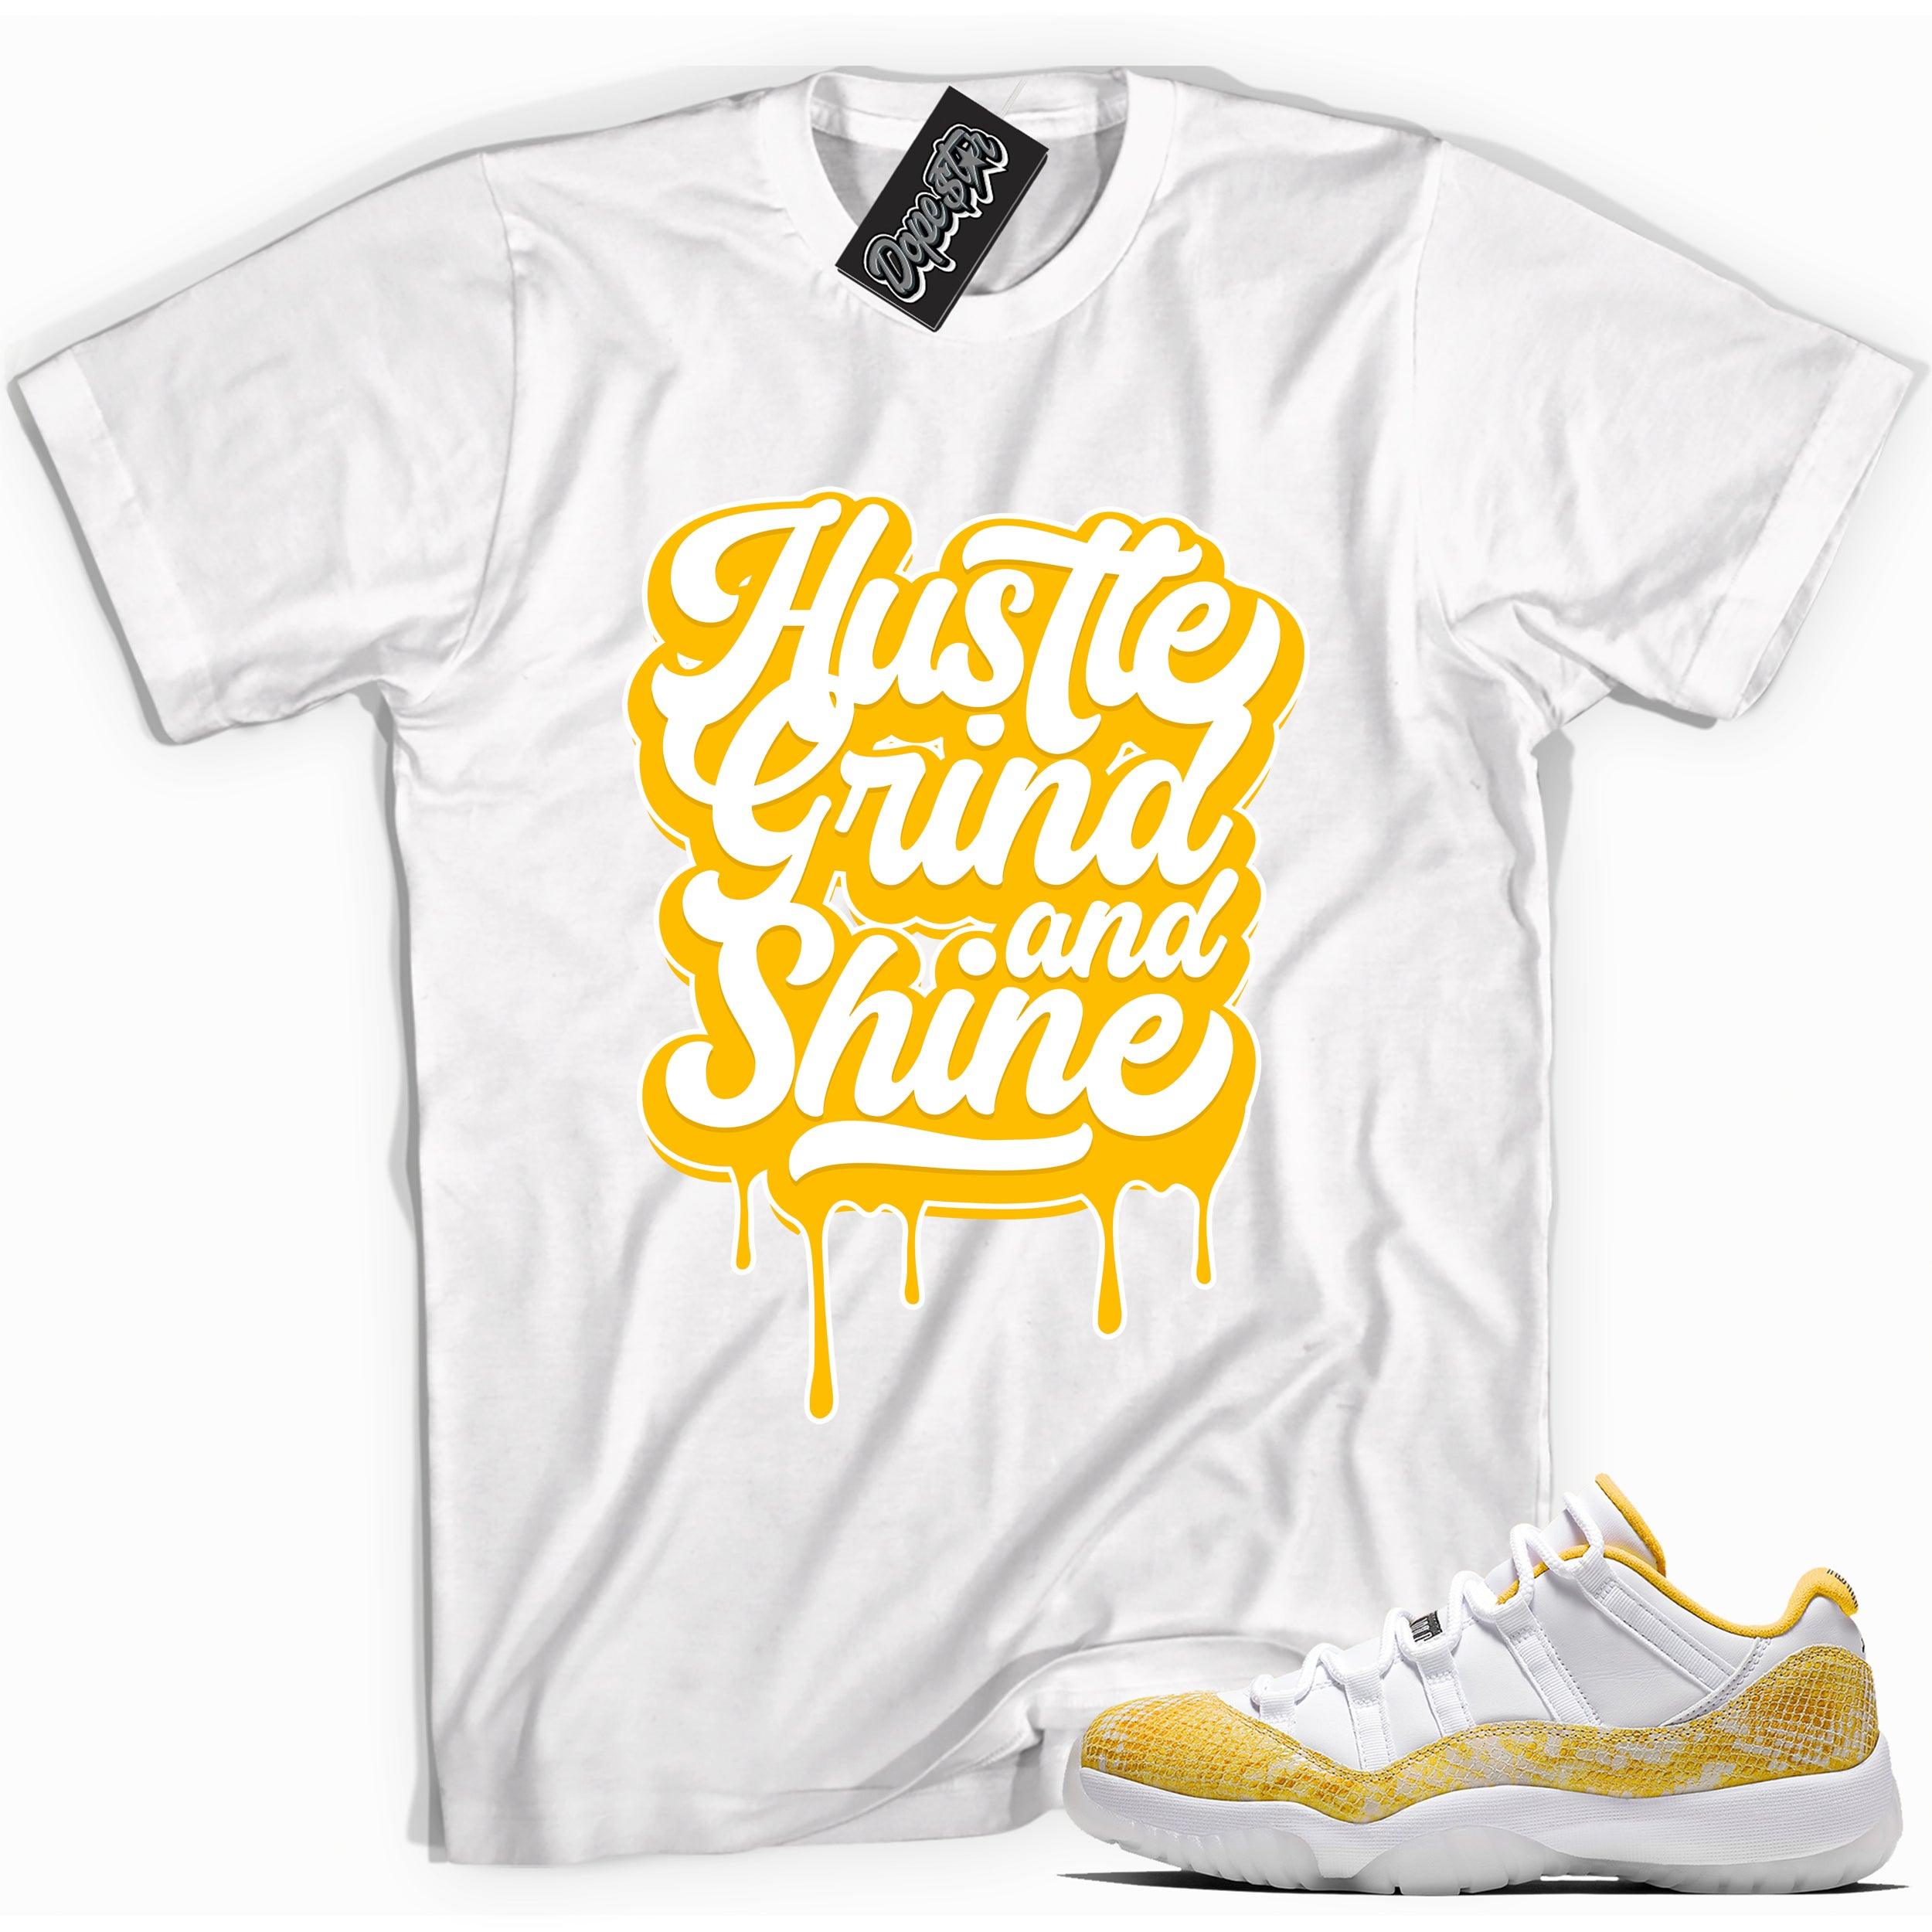 Cool white graphic tee with 'hustle grind and shine' print, that perfectly matches Air Jordan 11 Retro Low Yellow Snakeskin sneakers